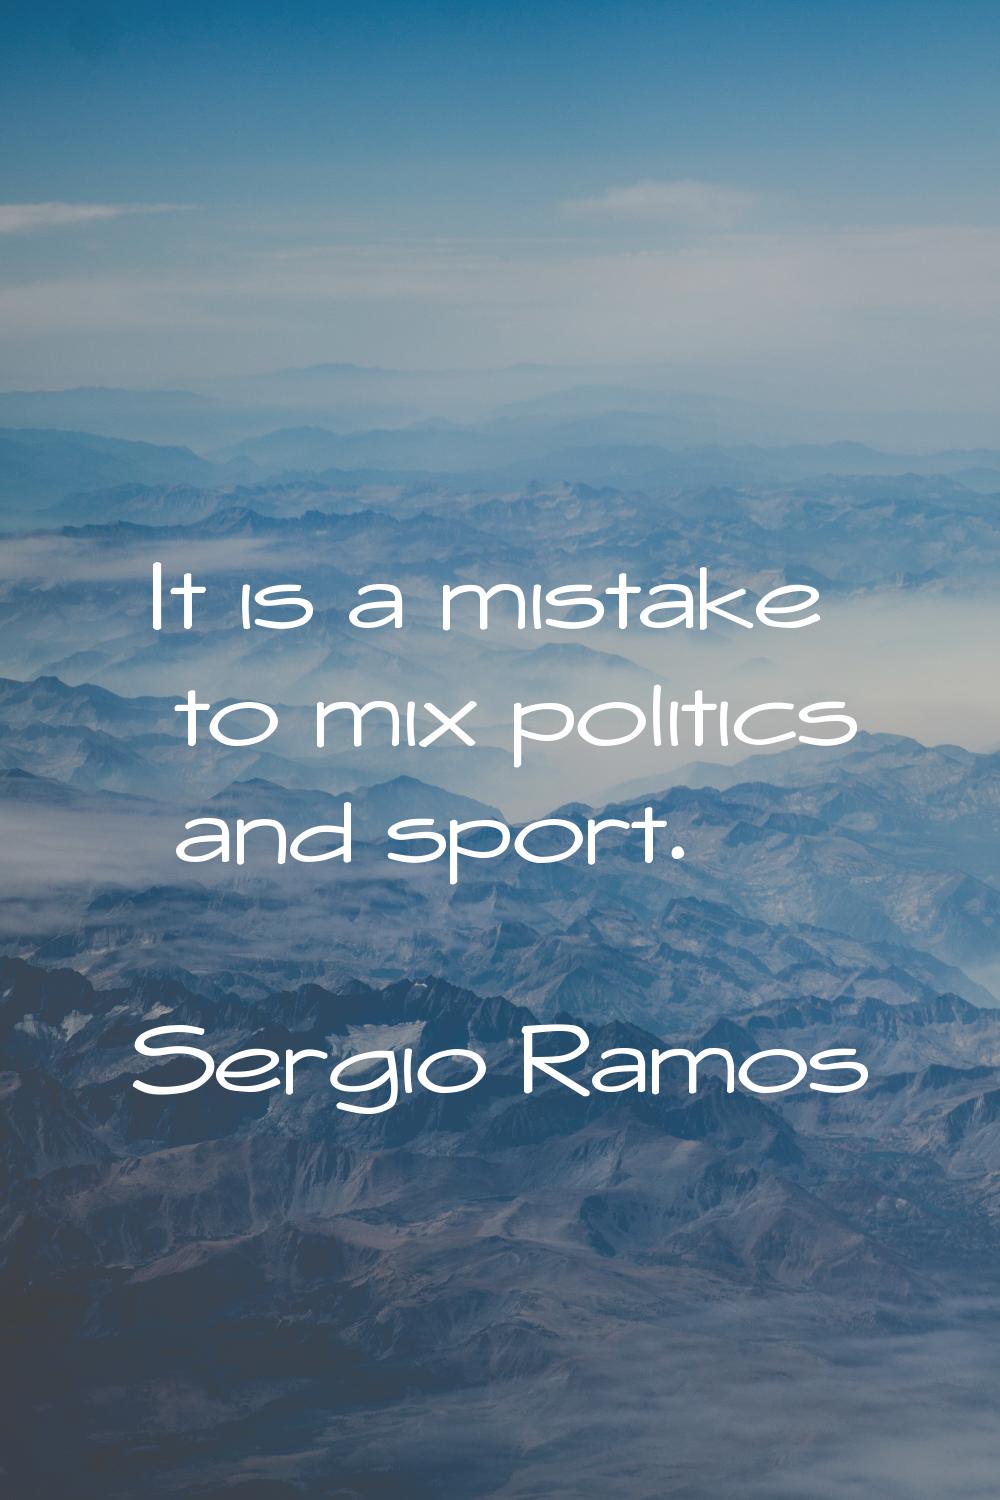 It is a mistake to mix politics and sport.